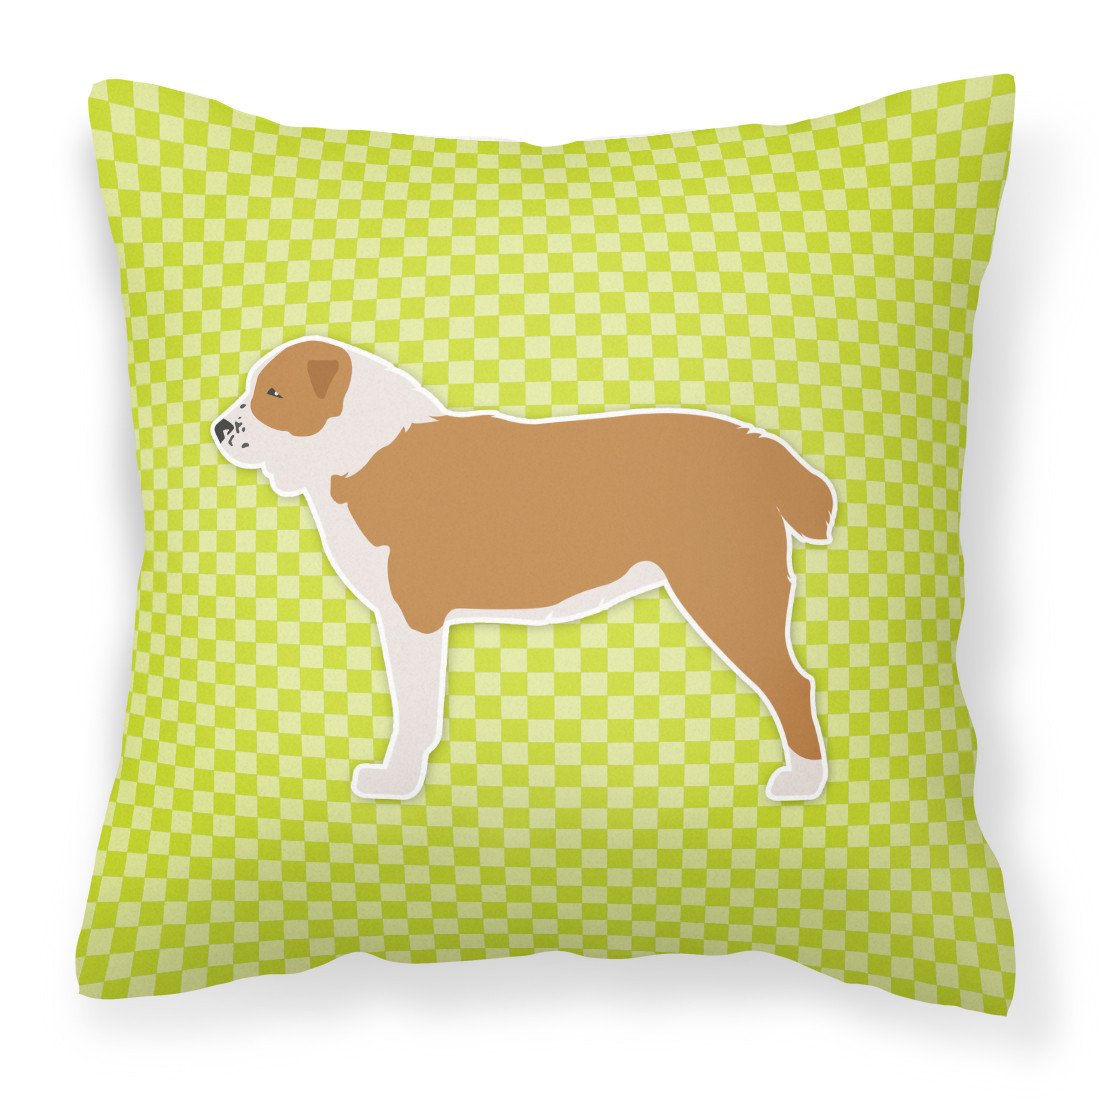 Central Asian Shepherd Dog Checkerboard Green Fabric Decorative Pillow BB3828PW1818 by Caroline's Treasures